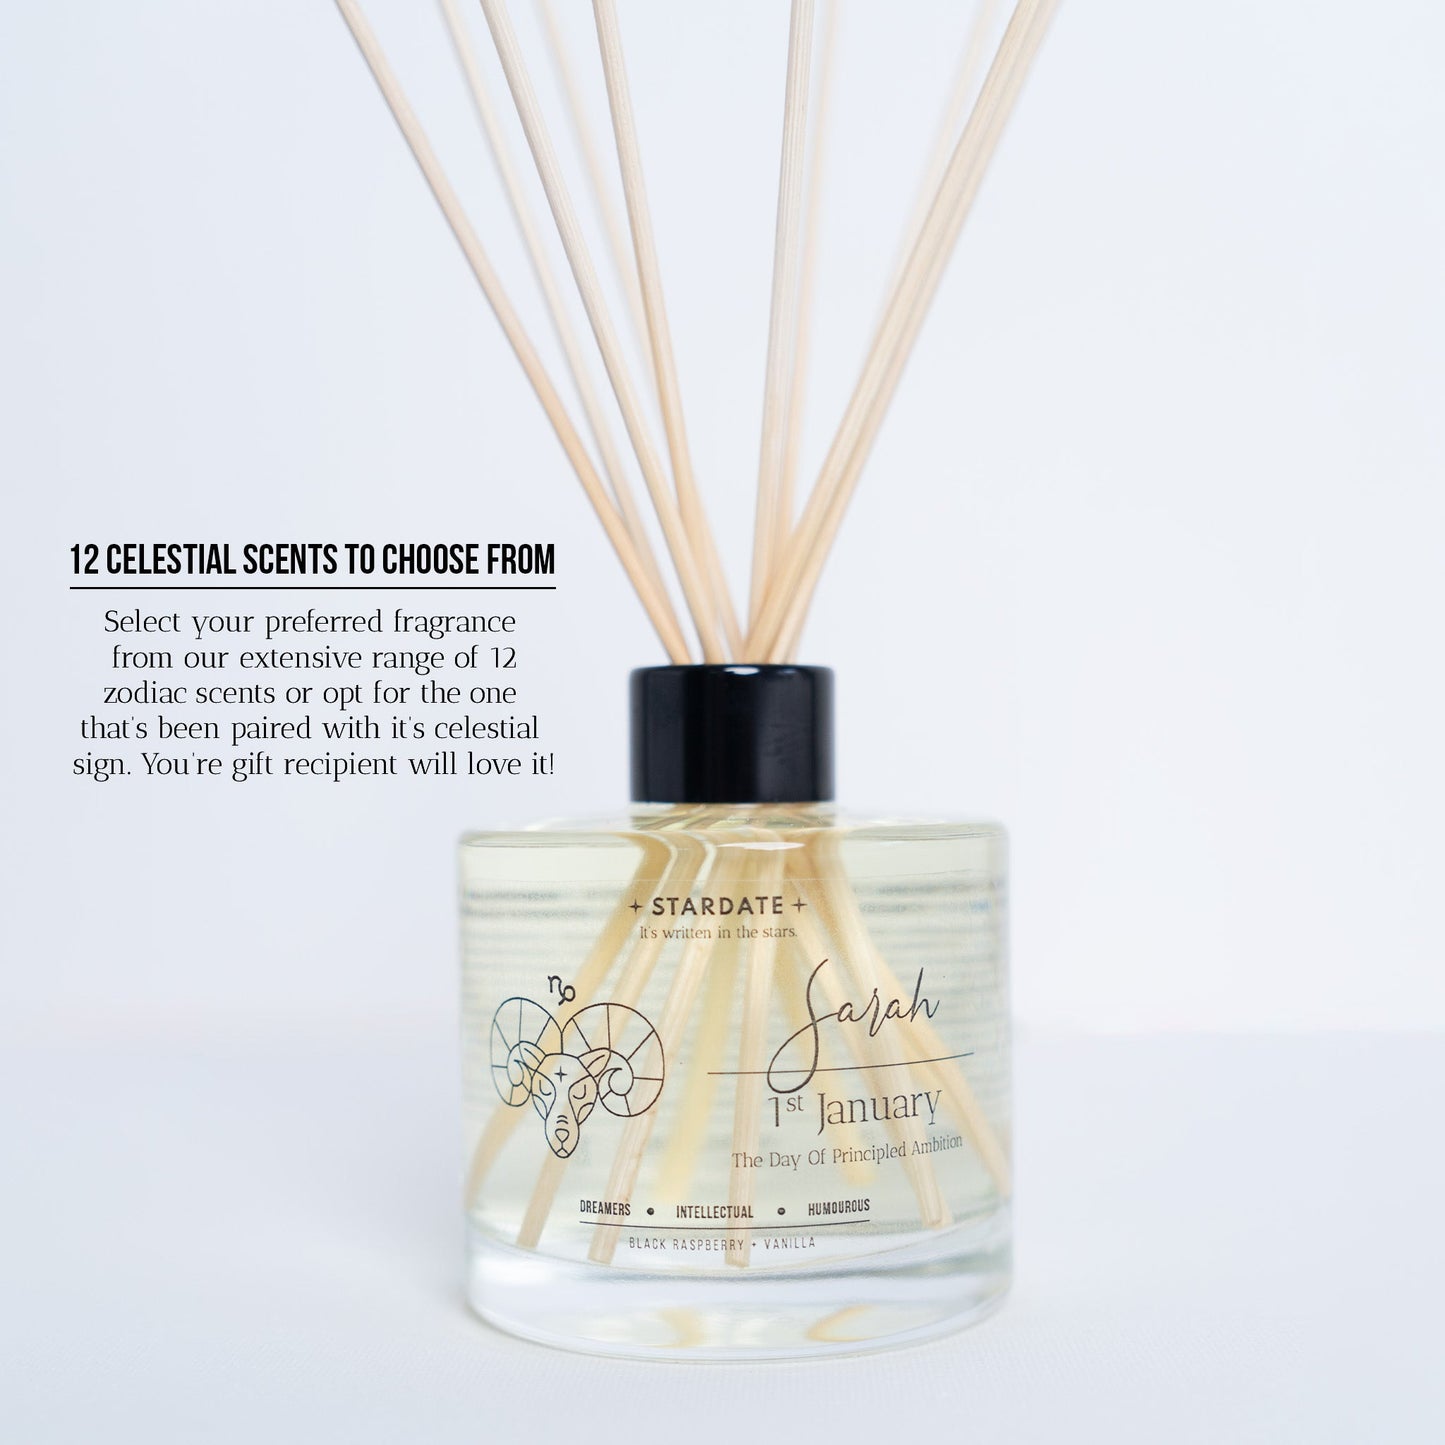 stardate-reed-diffuser-fragrances